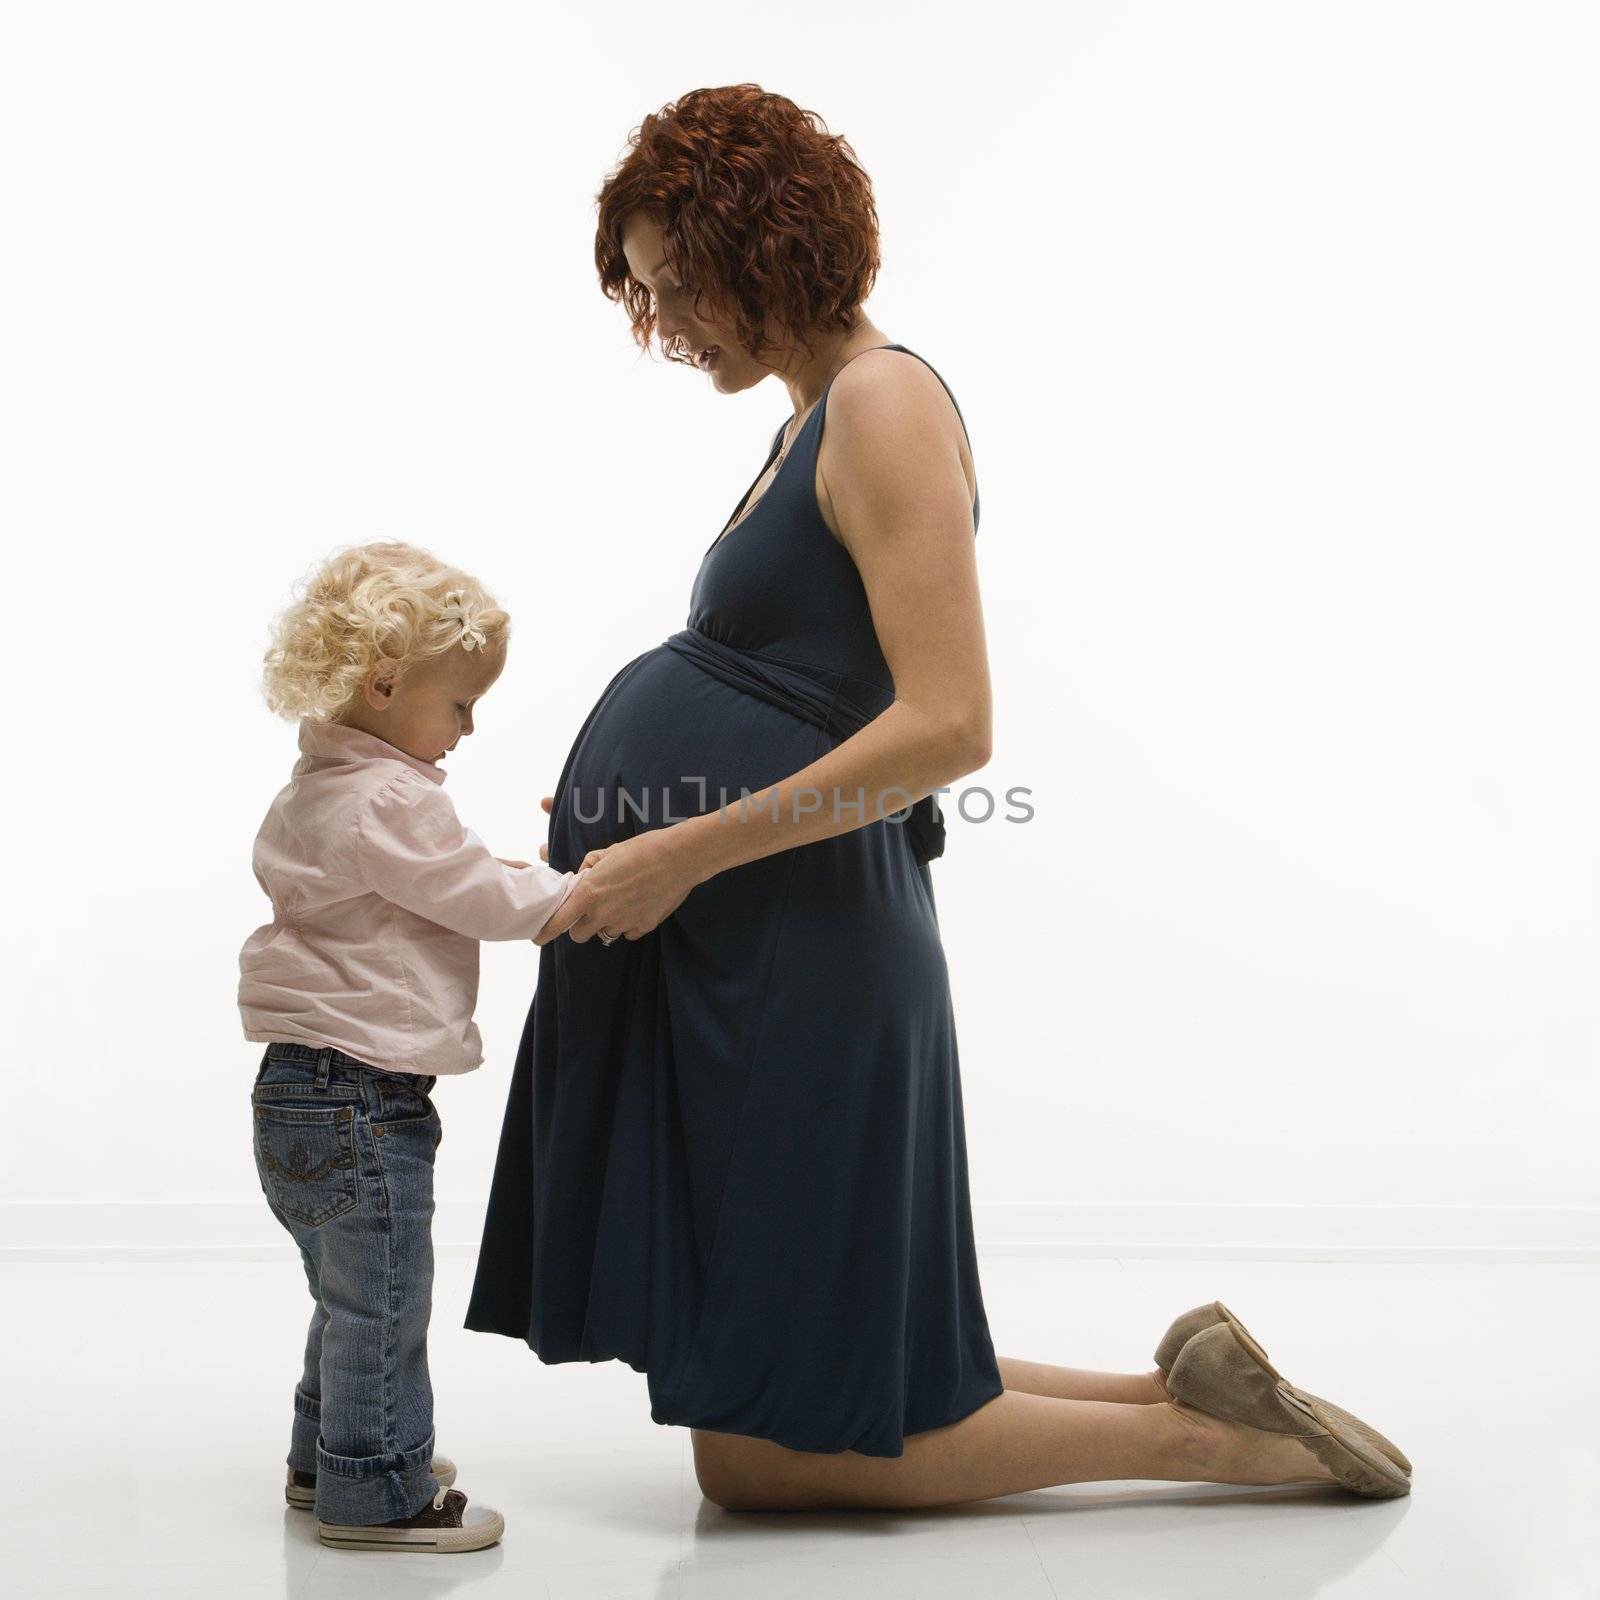 Caucasion mid-adult attractive pregnant woman kneeling in front of female toddler who is touching and looking at her belly.